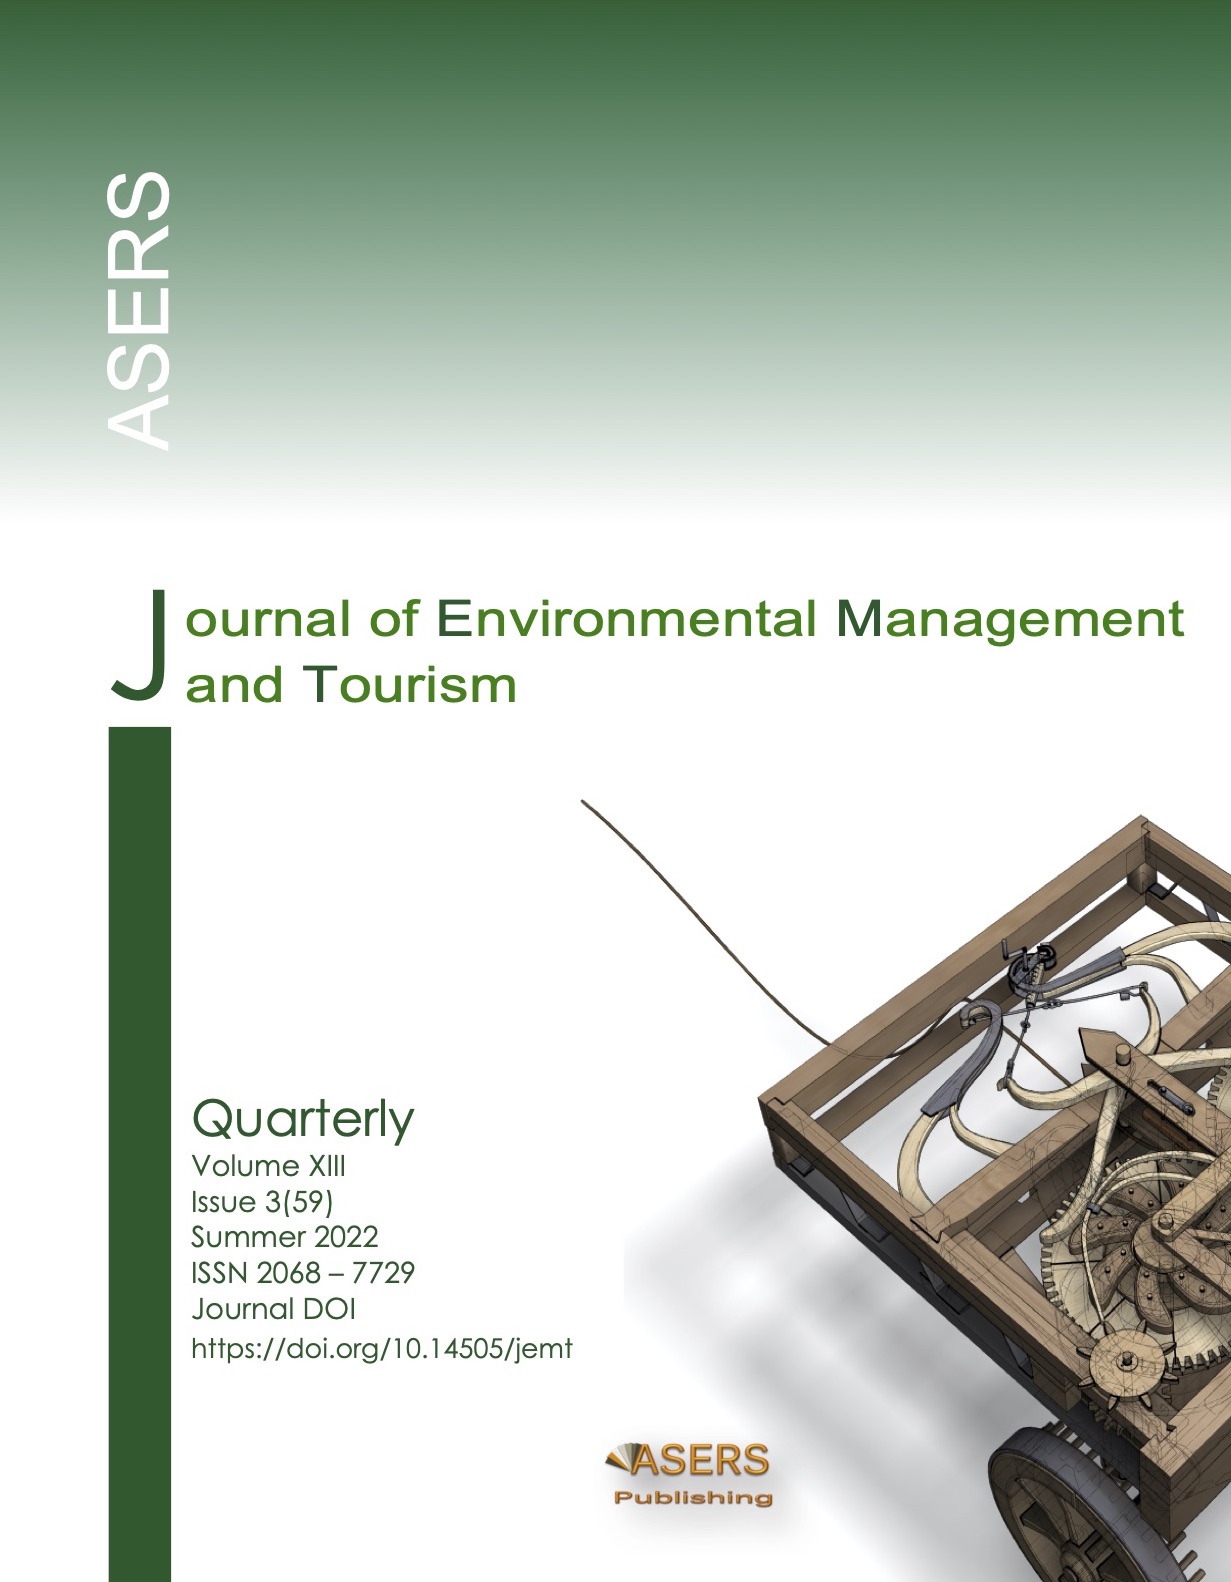 Developing a Conceptual Model to Implement the Employee Ecological Behavior in Organisations